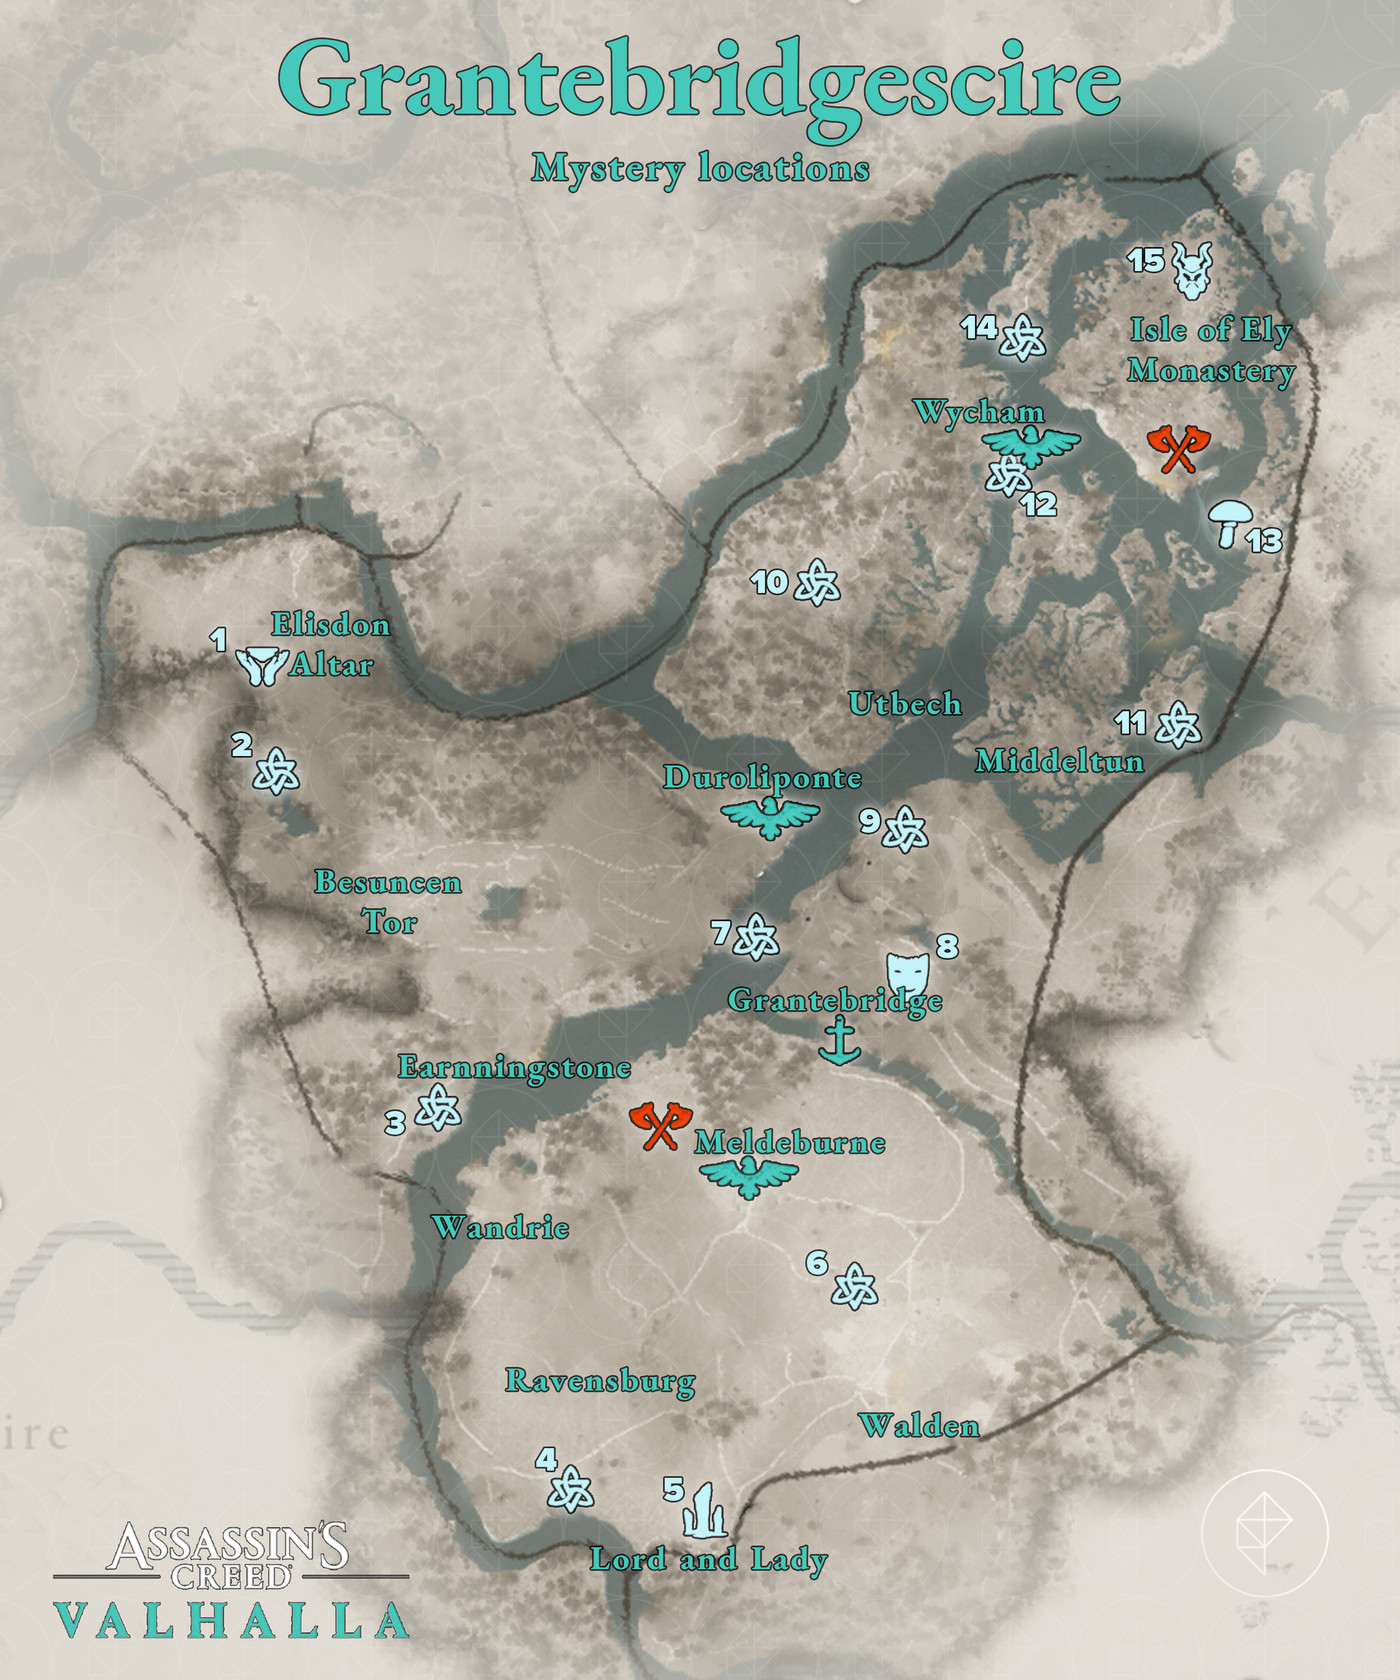 All Assassin S Creed Valhalla Grantebridgescire Wealth Mysteries And Artifacts Locations Map Polygon